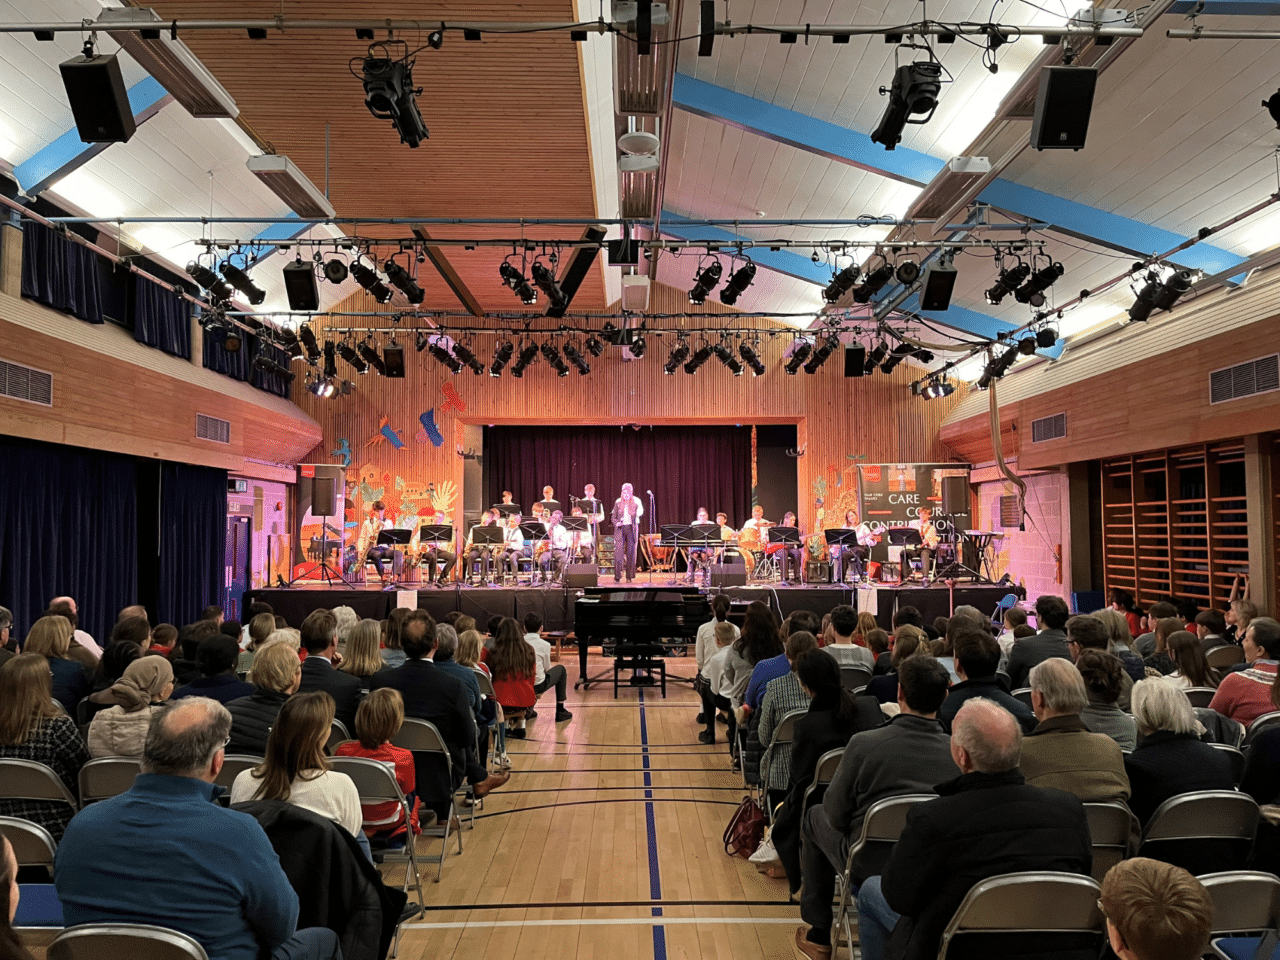 School Big Band perform on stage in school